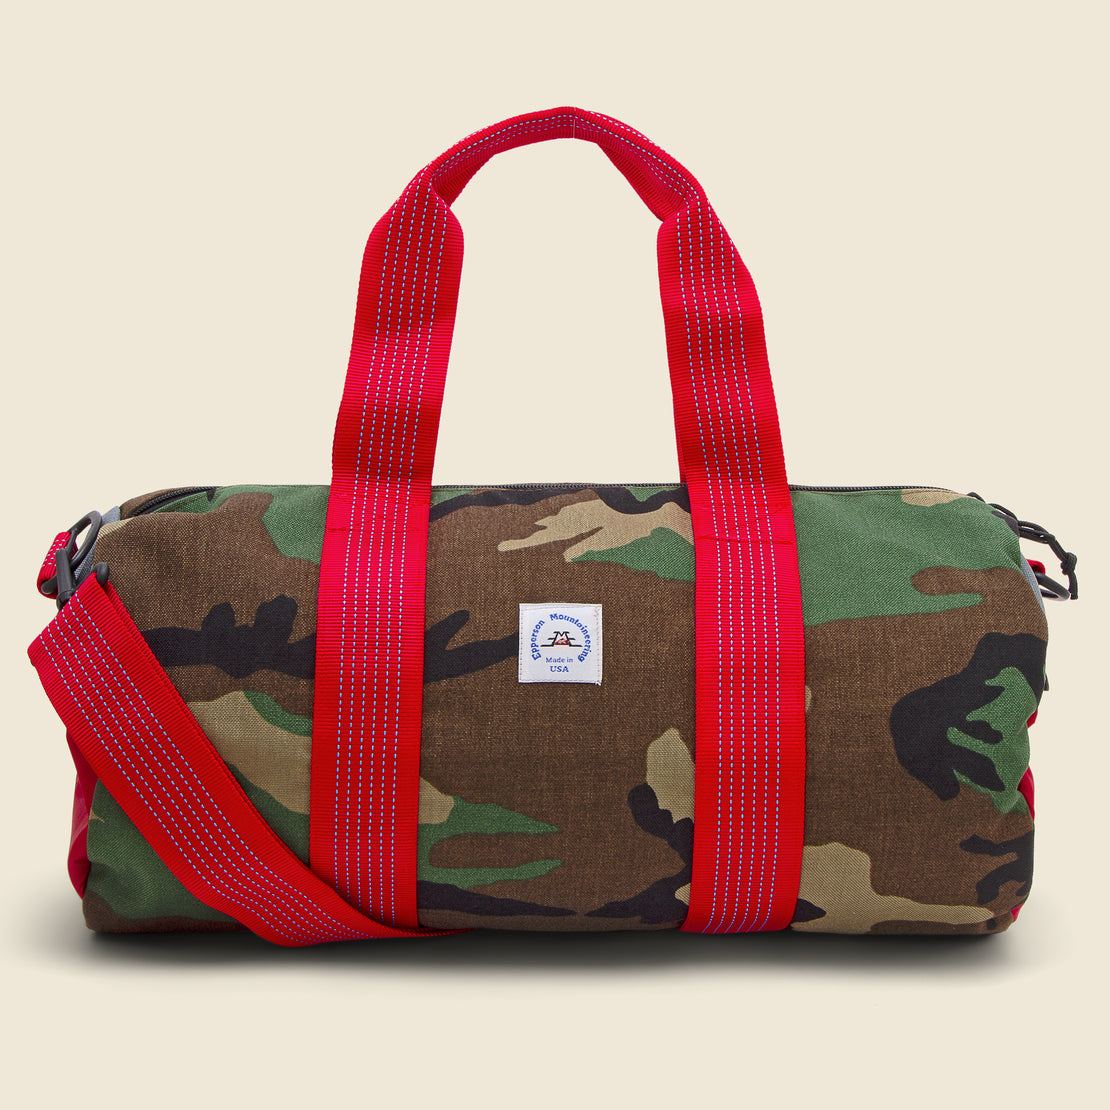 Epperson Mountaineering Duffle Bag - MS Woodland Camo